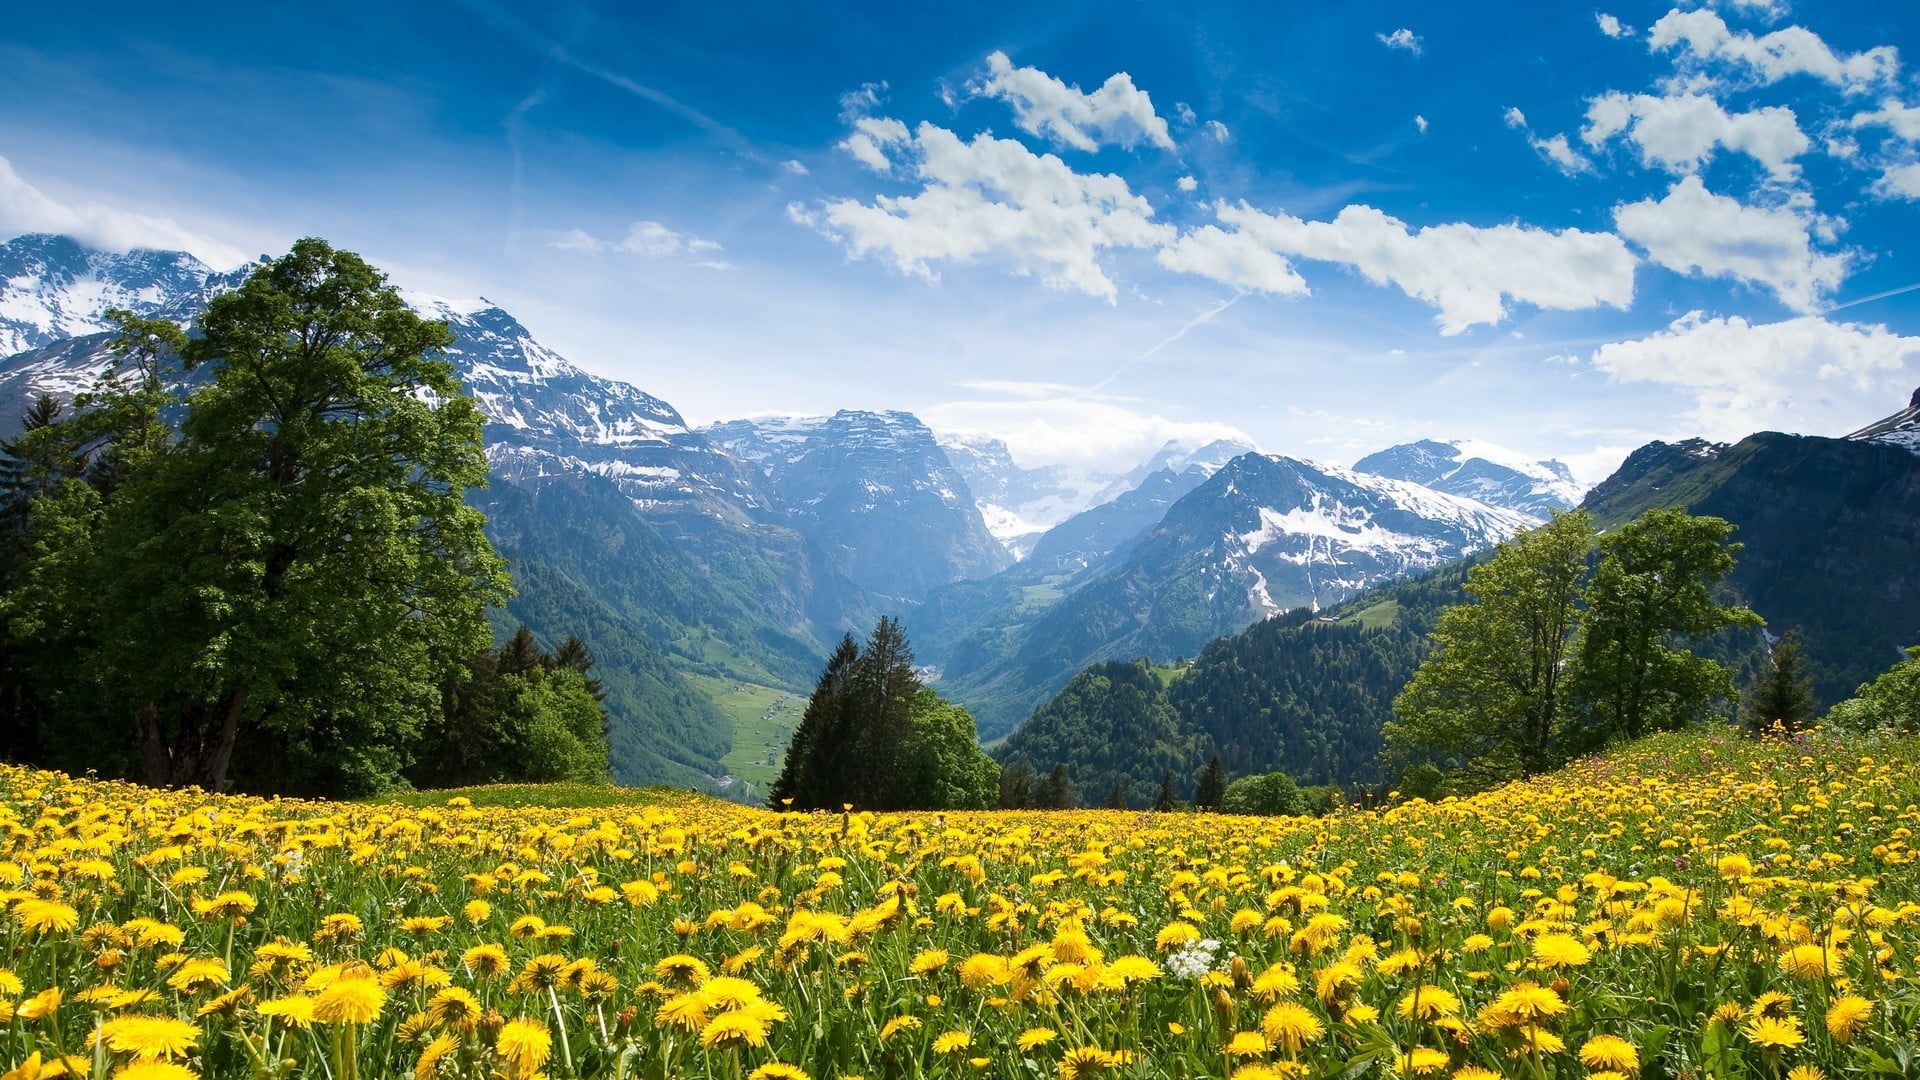 dandelion flower field, mountains, beauty in nature, plant, scenics - nature